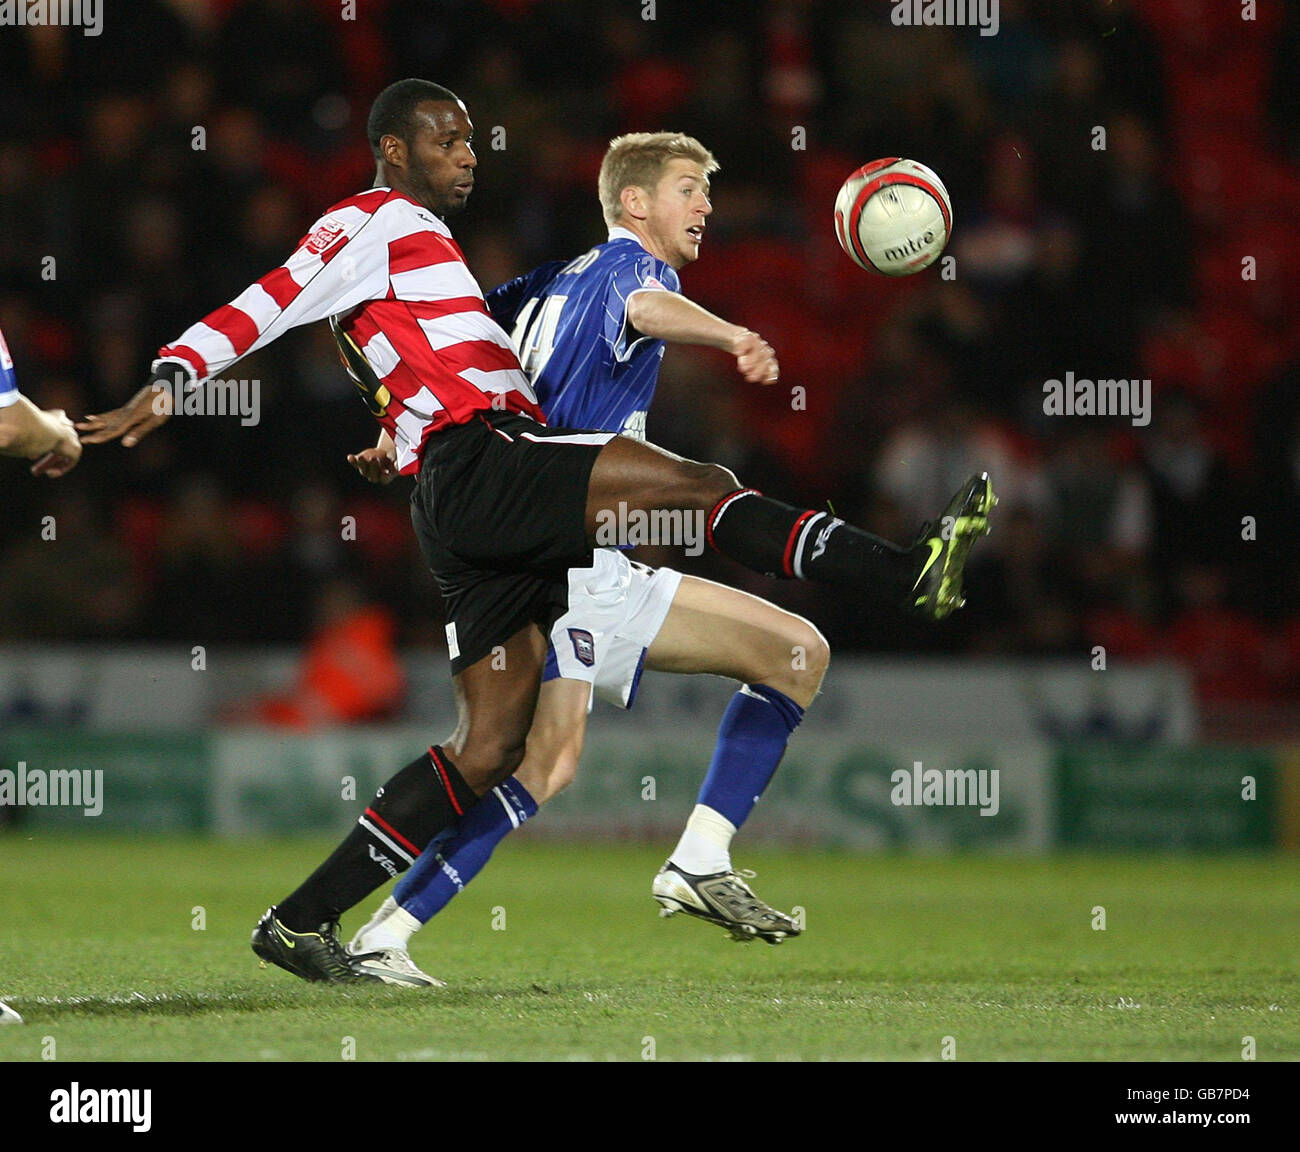 Doncaster Rovers' Shelton Martis and Ipswich Town's Jonathan Stead battle for the ball during the Coca-Cola Football Championship match at Keepmoat Stadium, Doncaster. Stock Photo